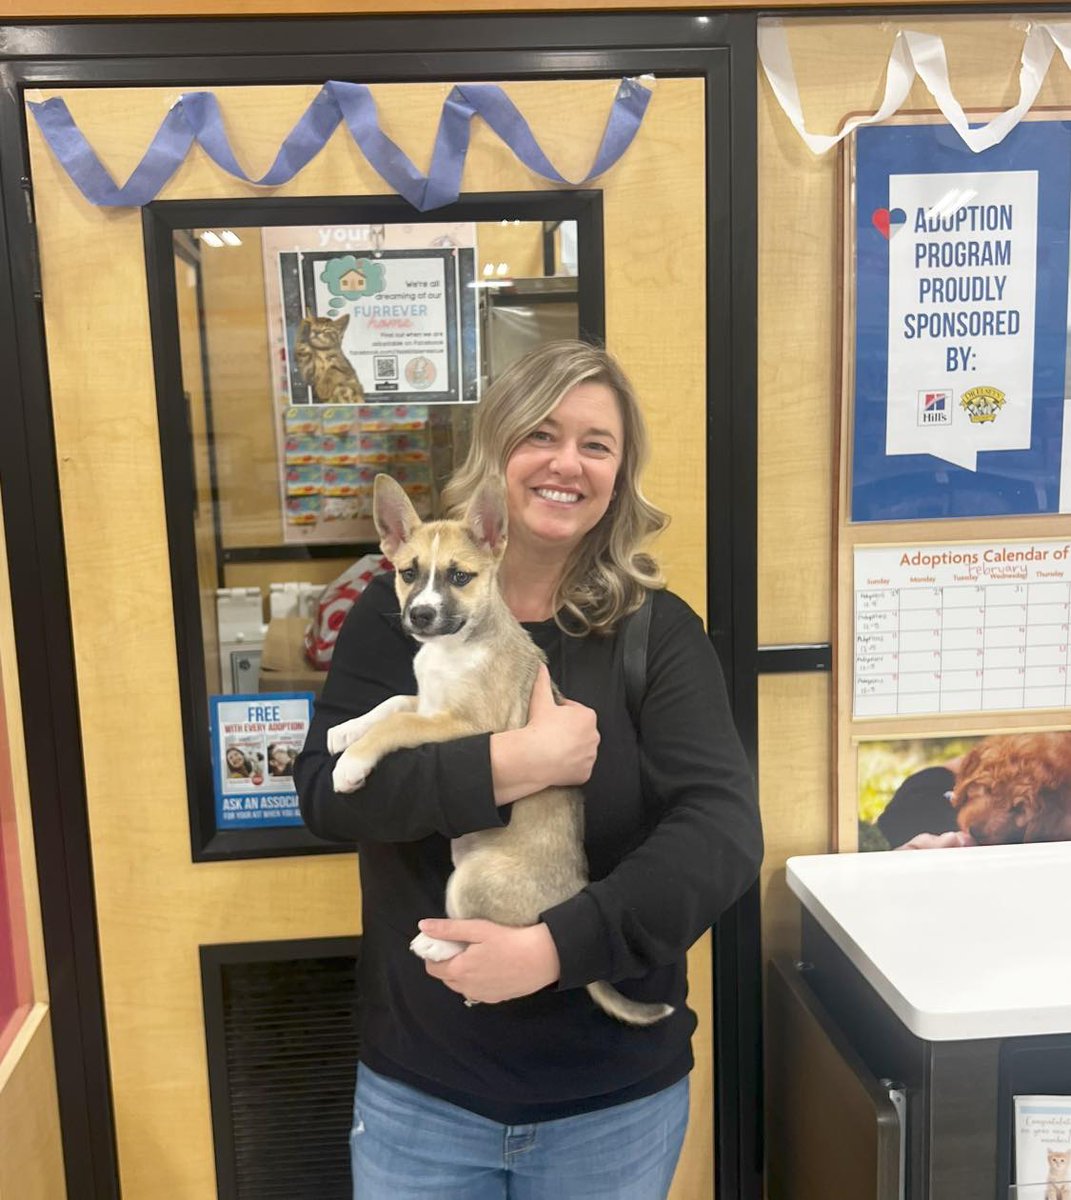 😍Adopted!!😍
Congratulations to sweet little Deedee who found herself the most loving home with her new momma who fostered to adopt her!
 We are so happy for you all!
#gotchaday #fureverhome #puppies #adoptdontshop #petsmartcharities #whiskerwednesday